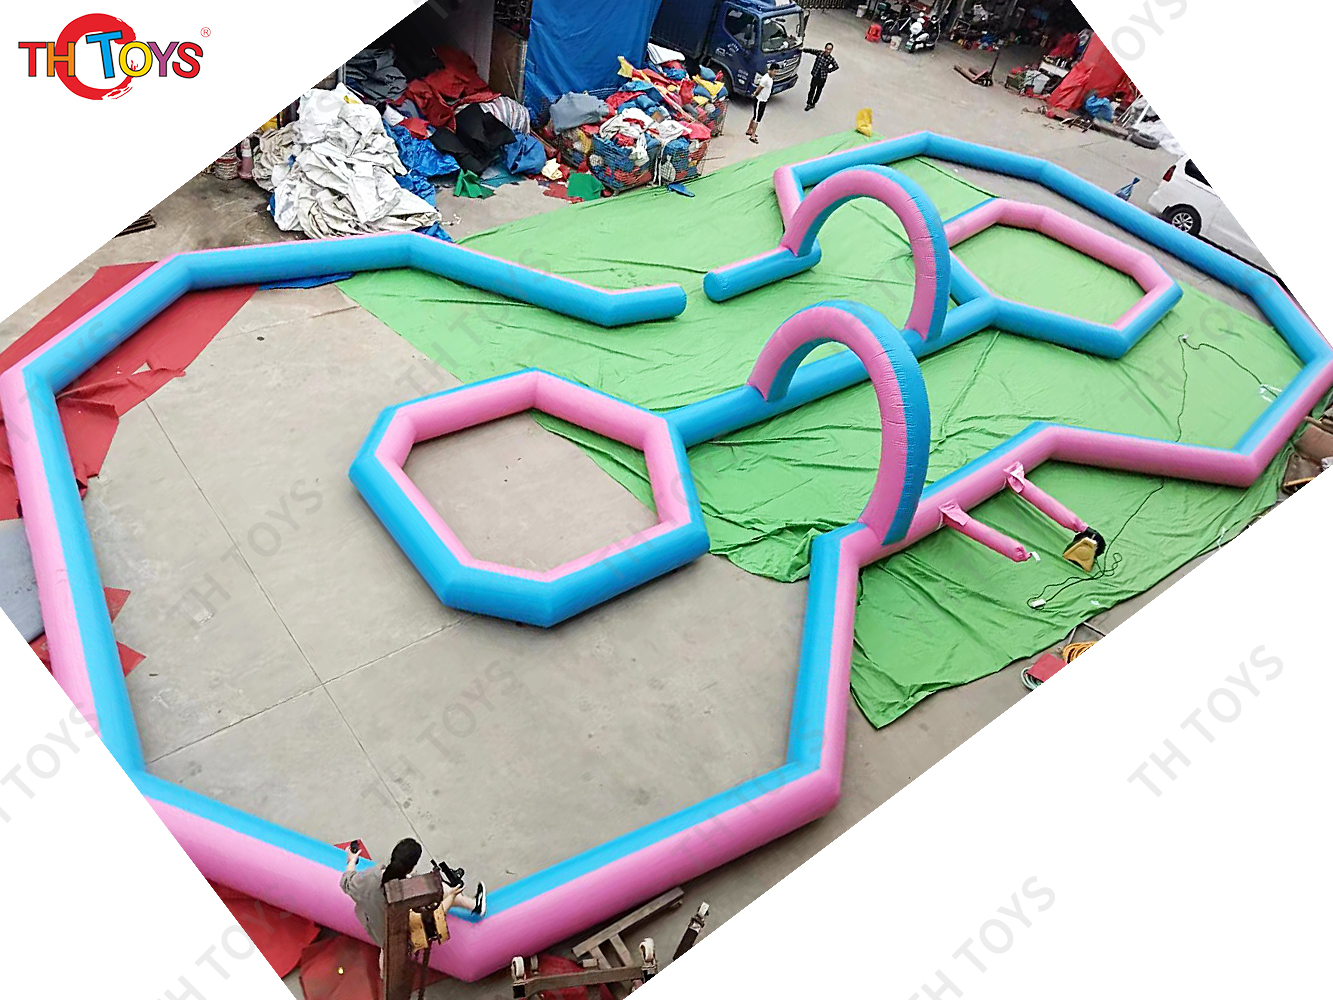 New inflatable go kart race track inflatable zorbball race track, inflatable bumper cars racing track